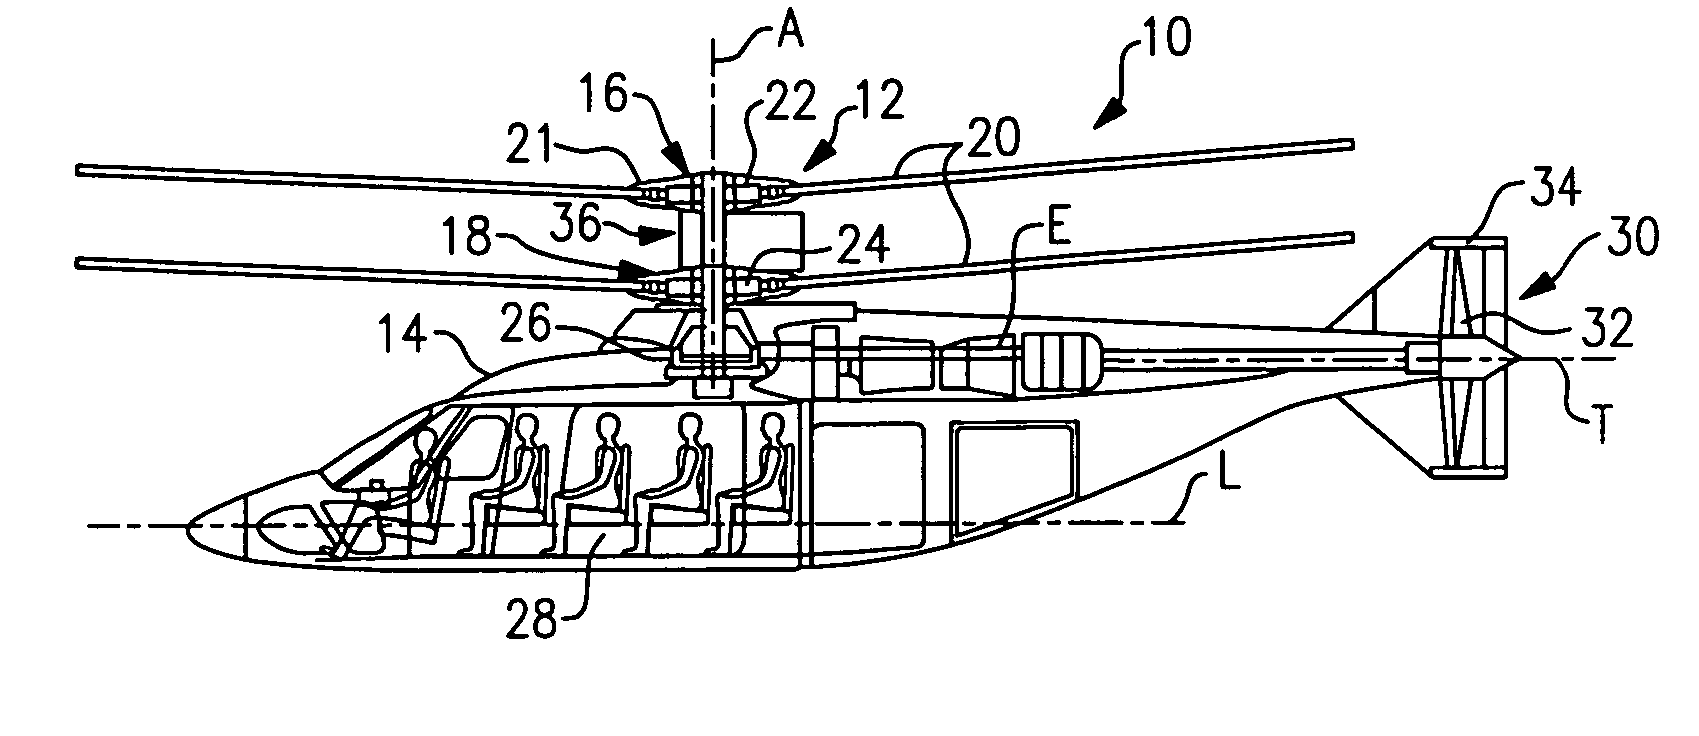 De-rotation system for a counter-rotating, coaxial rotor hub shaft fairing